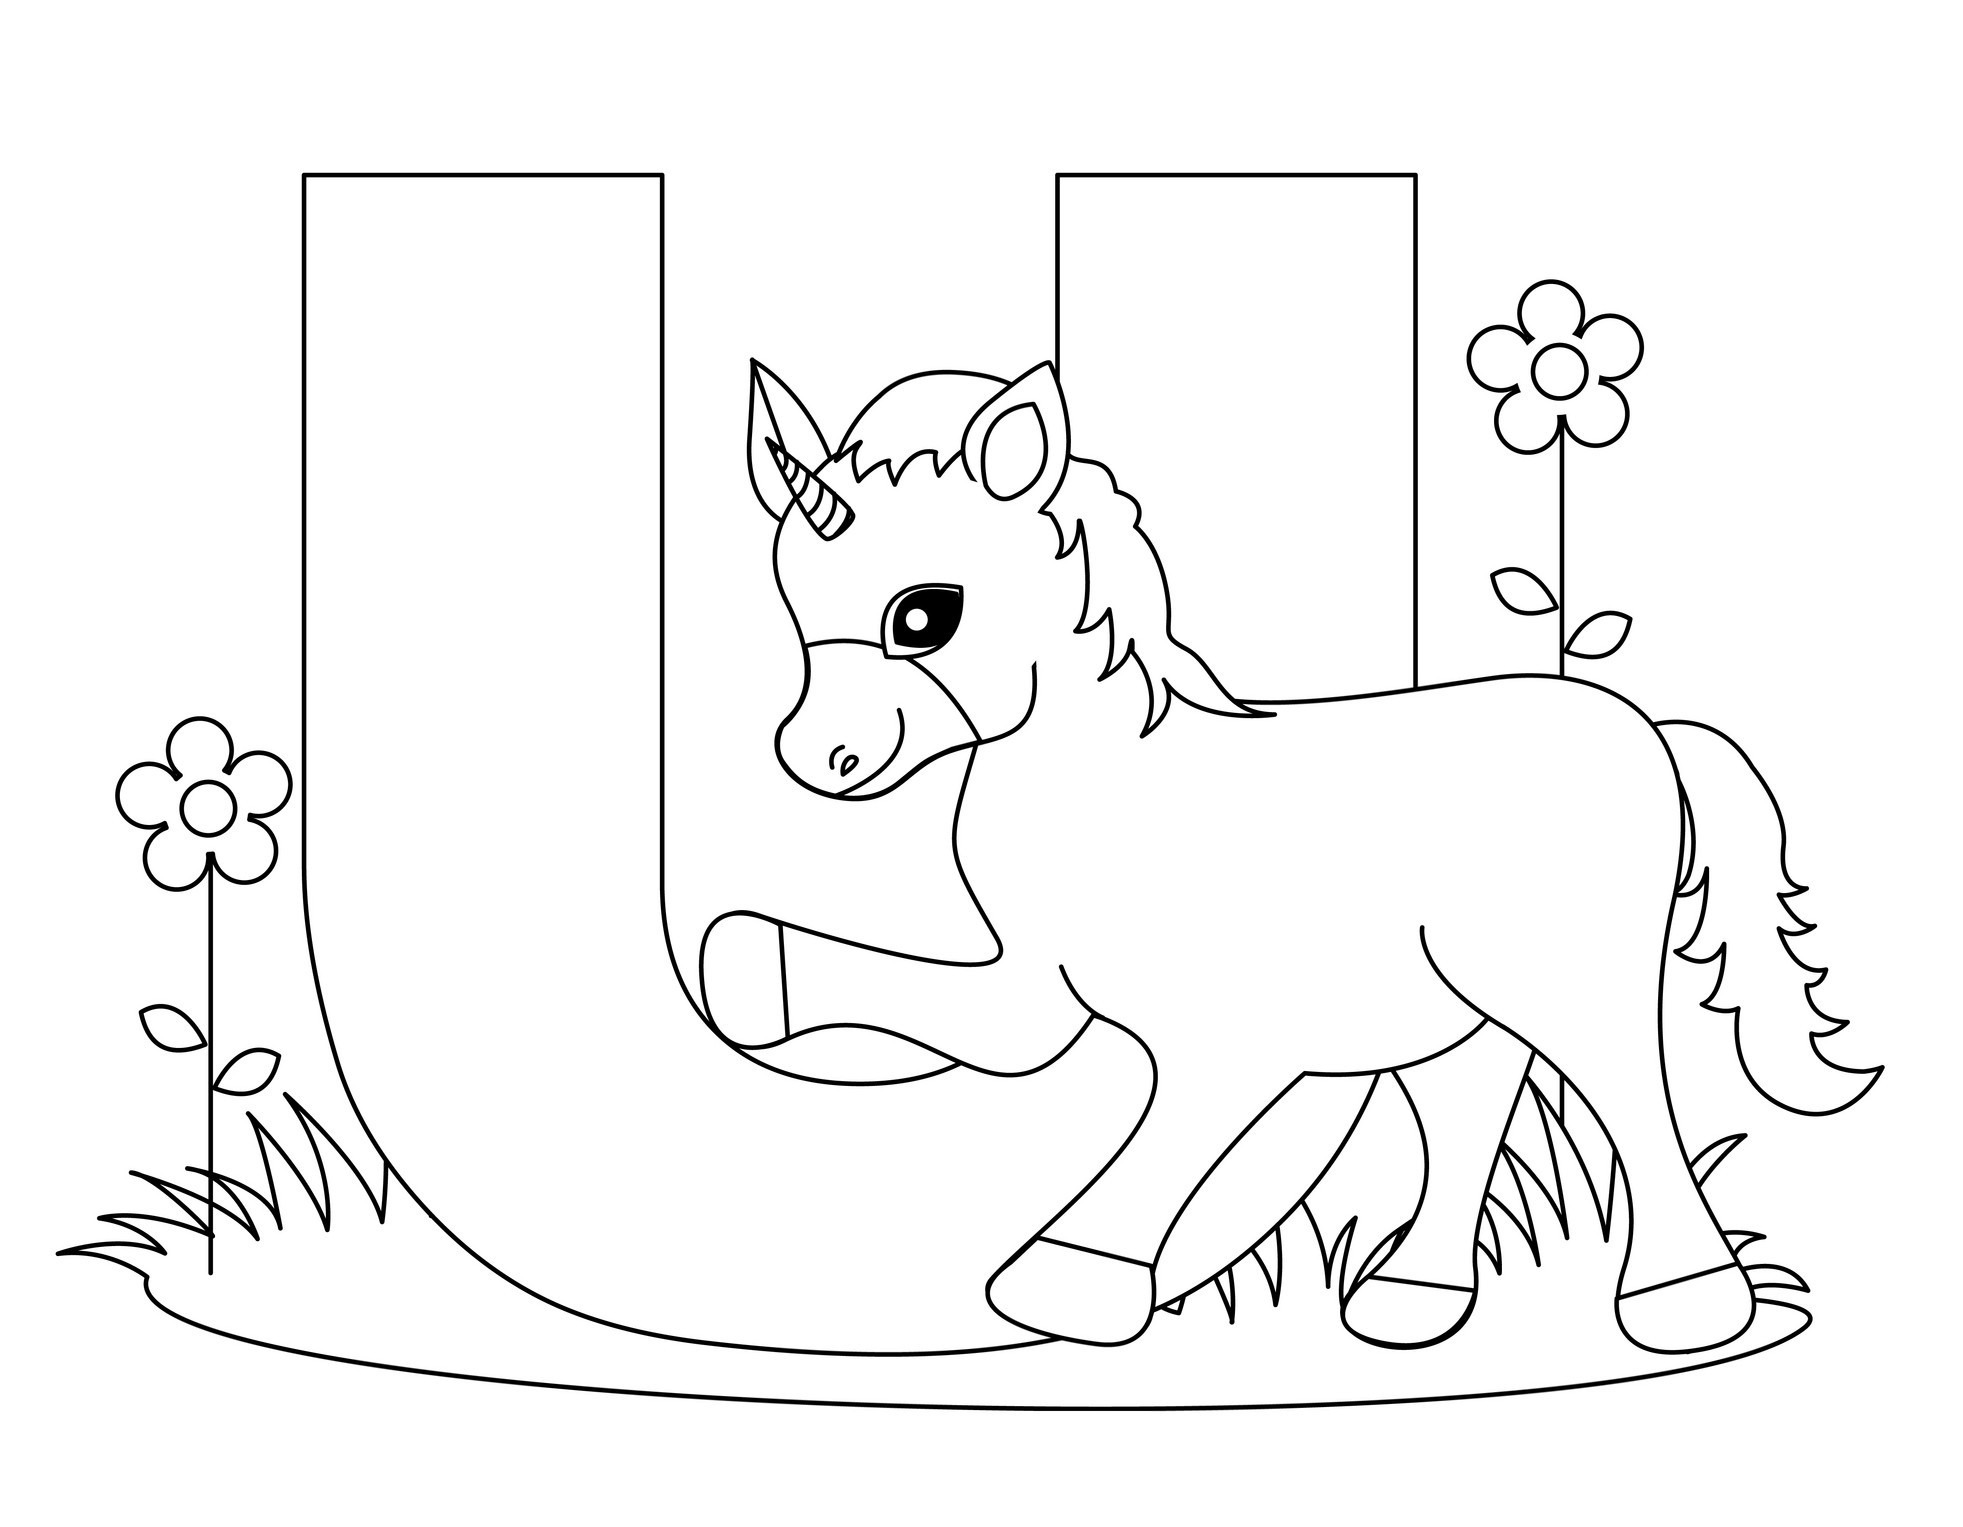 letter a coloring page fun learn free worksheets for kid ภาพระบายส abc a z letter a page coloring 